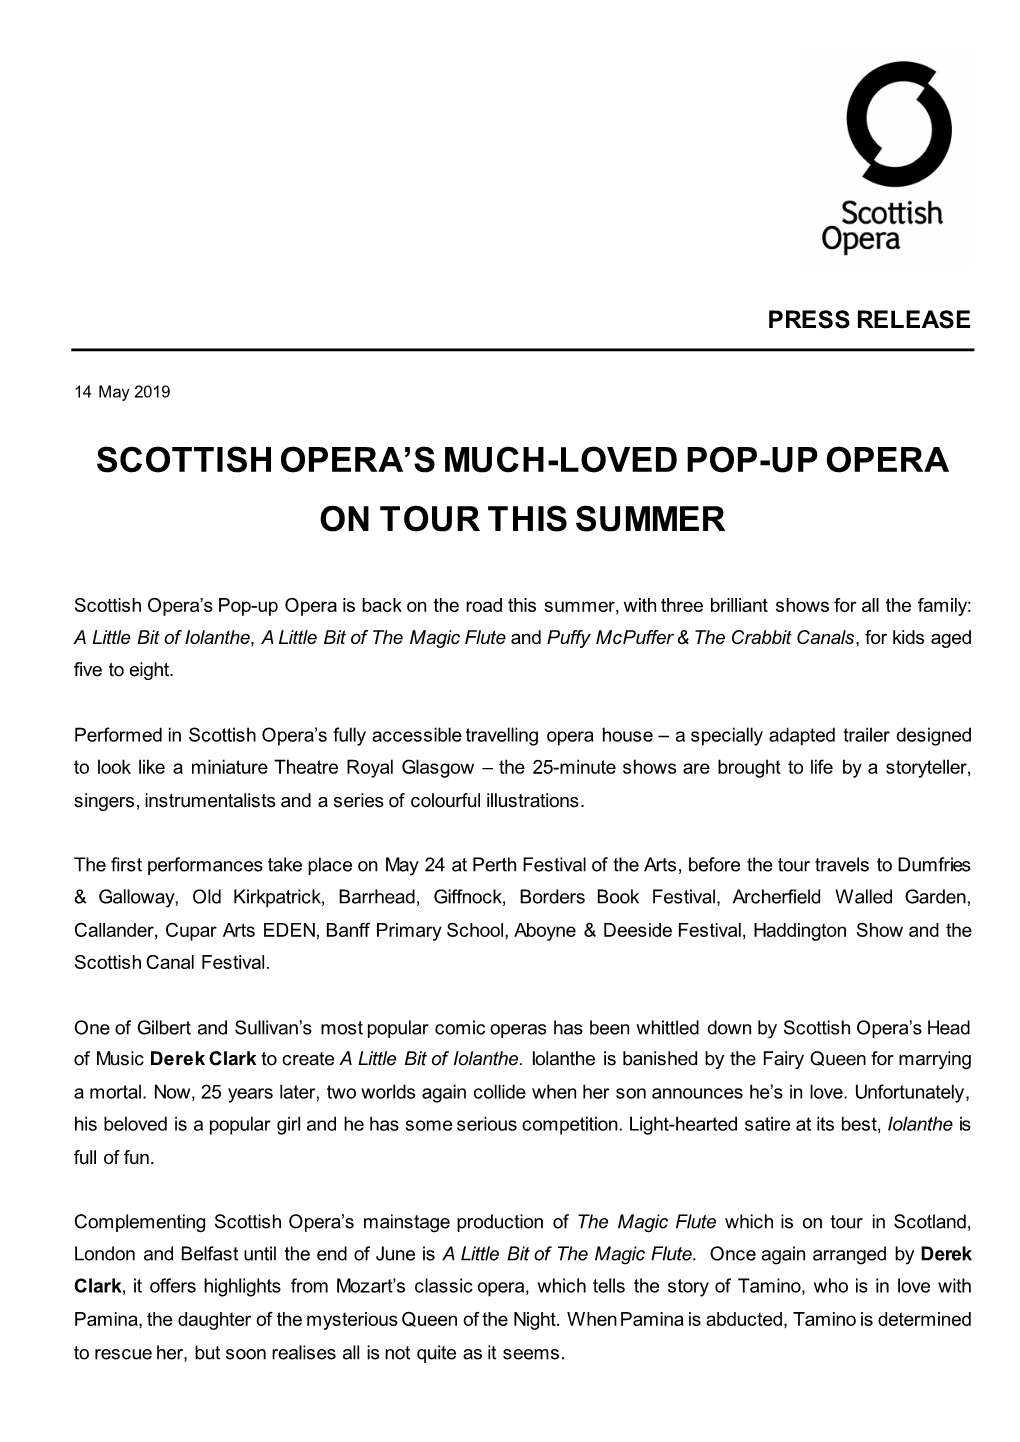 Scottish Opera's Much-Loved Pop-Up Opera on Tour This